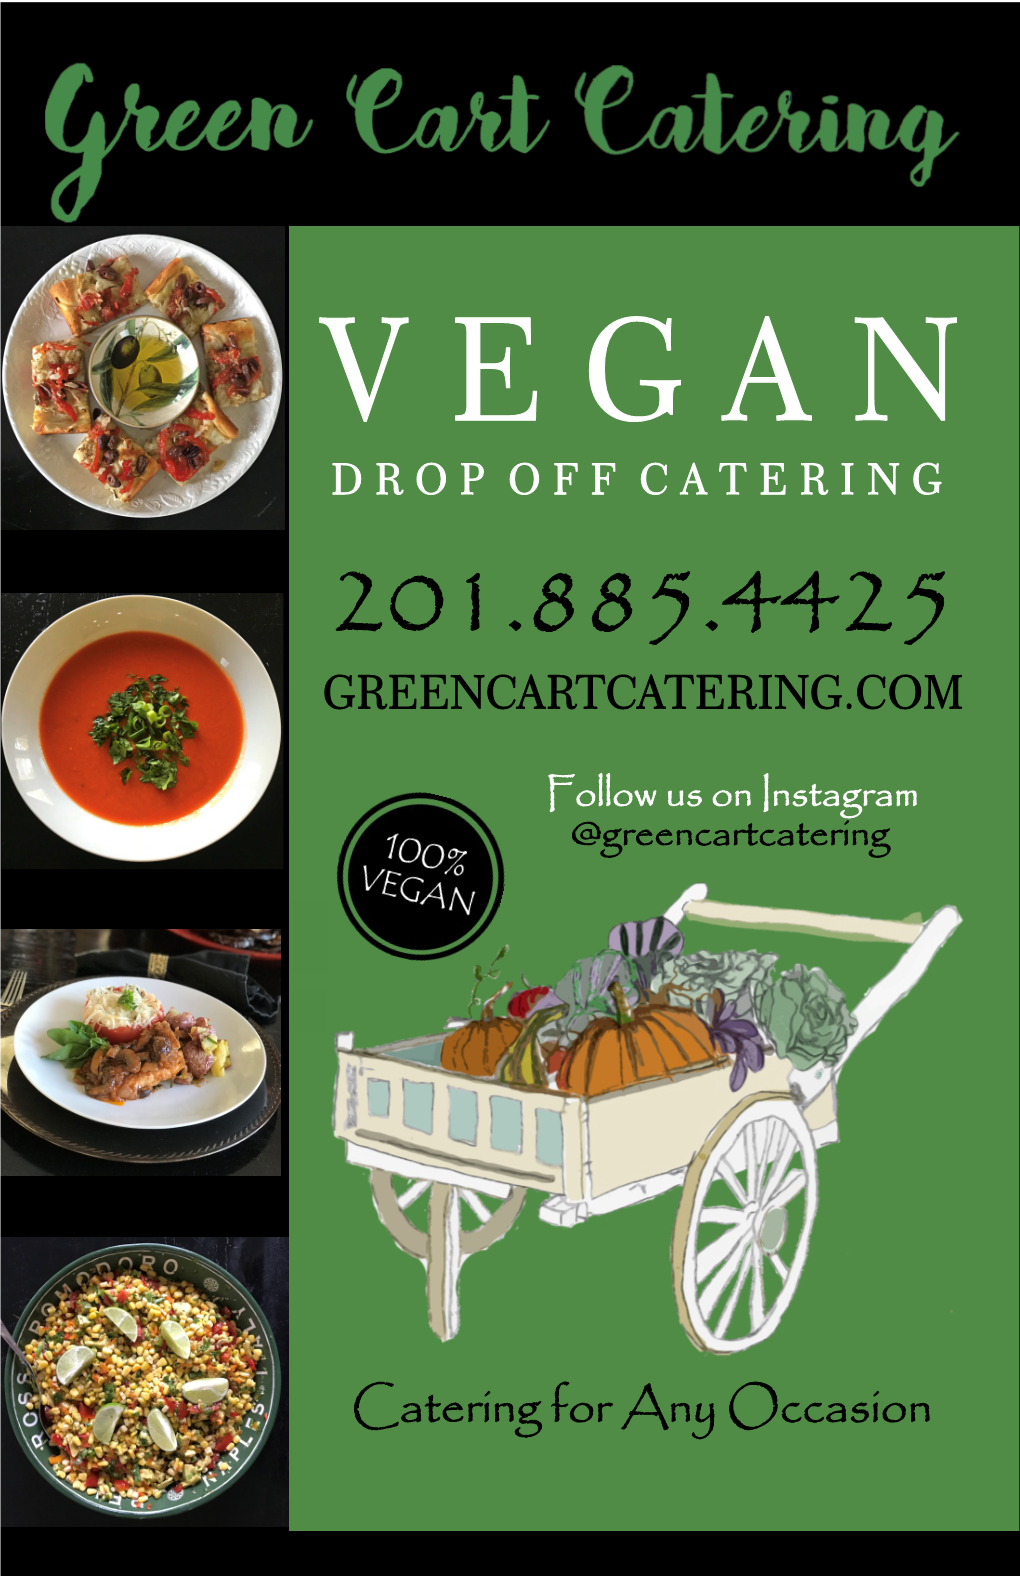 Our Drop Off Catering Menu